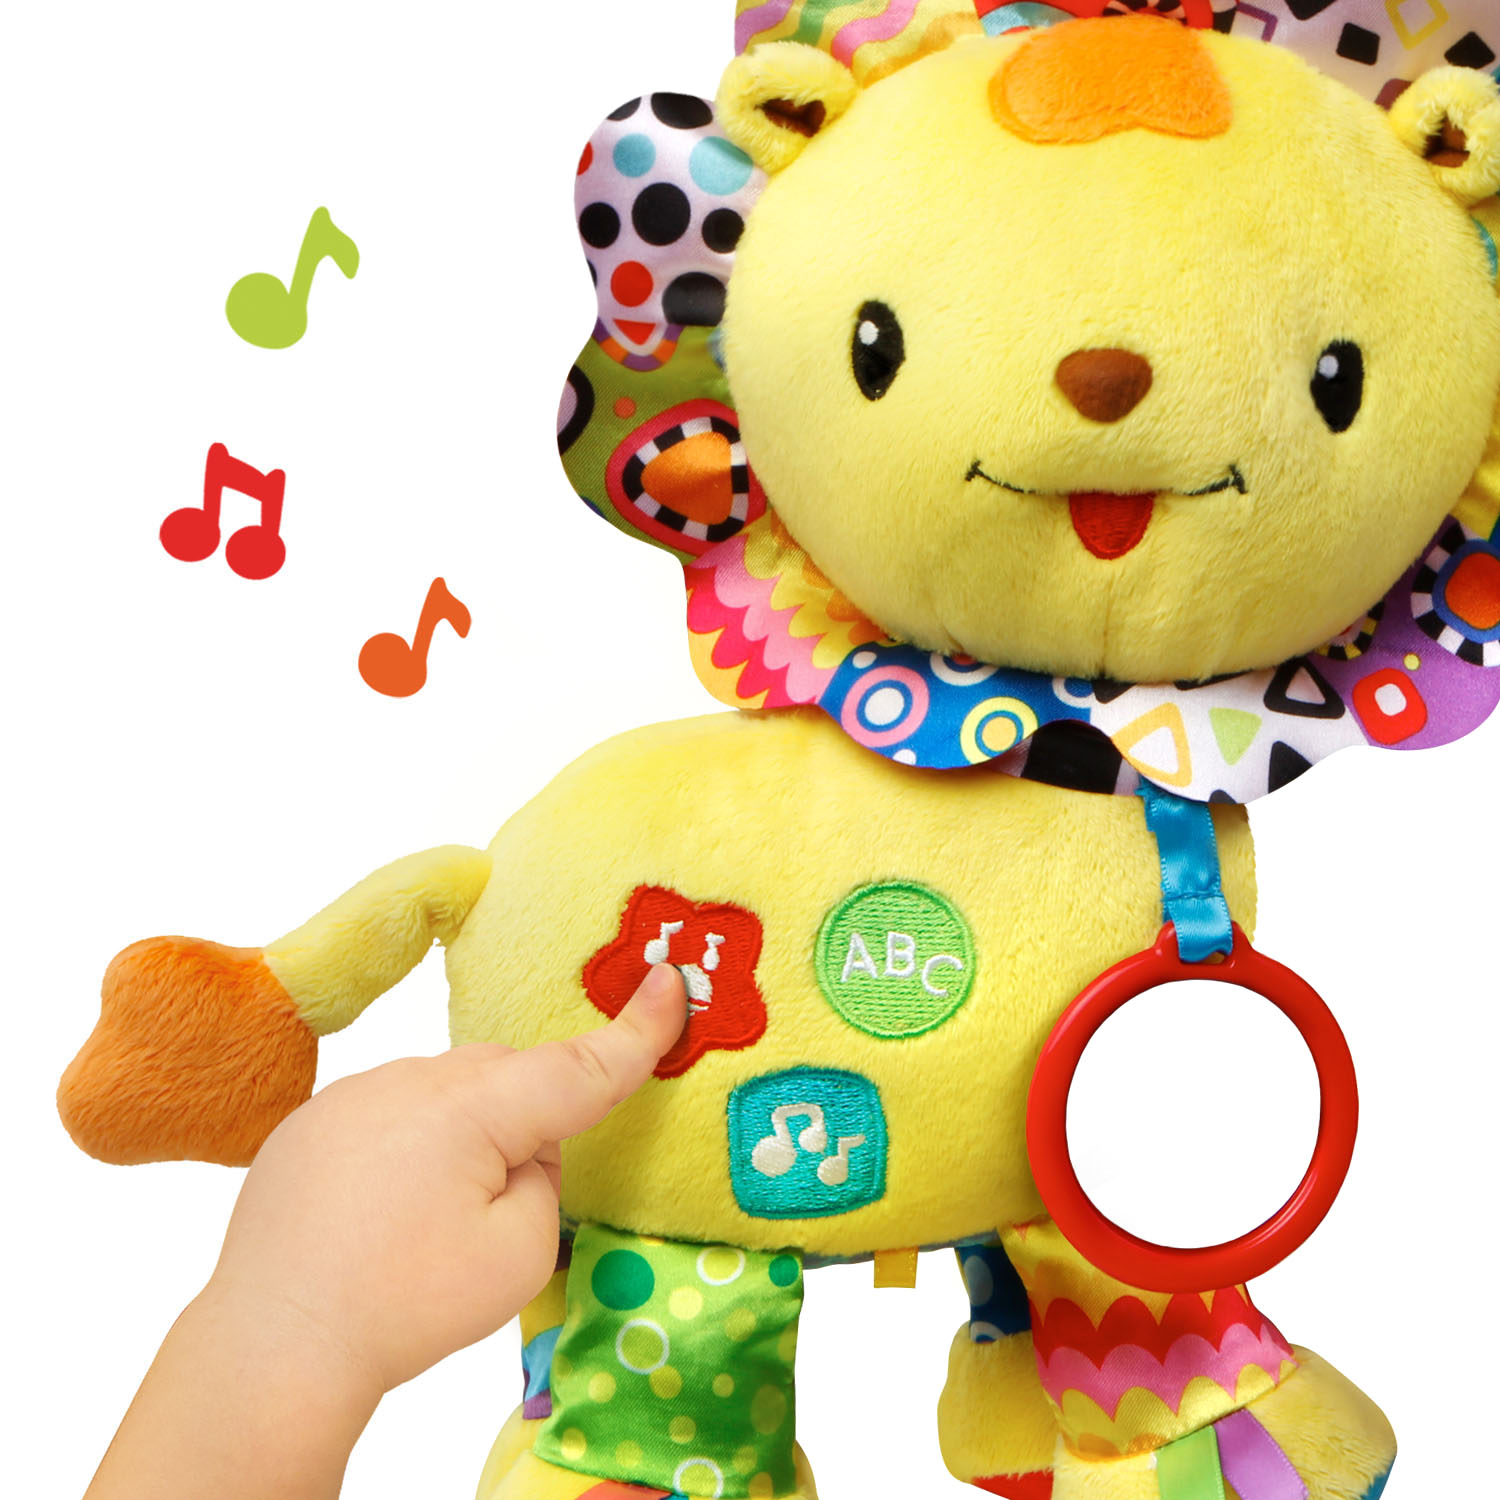 VTech Crinkle and Roar Lion, Plush Sensory Toy for Baby Infant - image 4 of 5